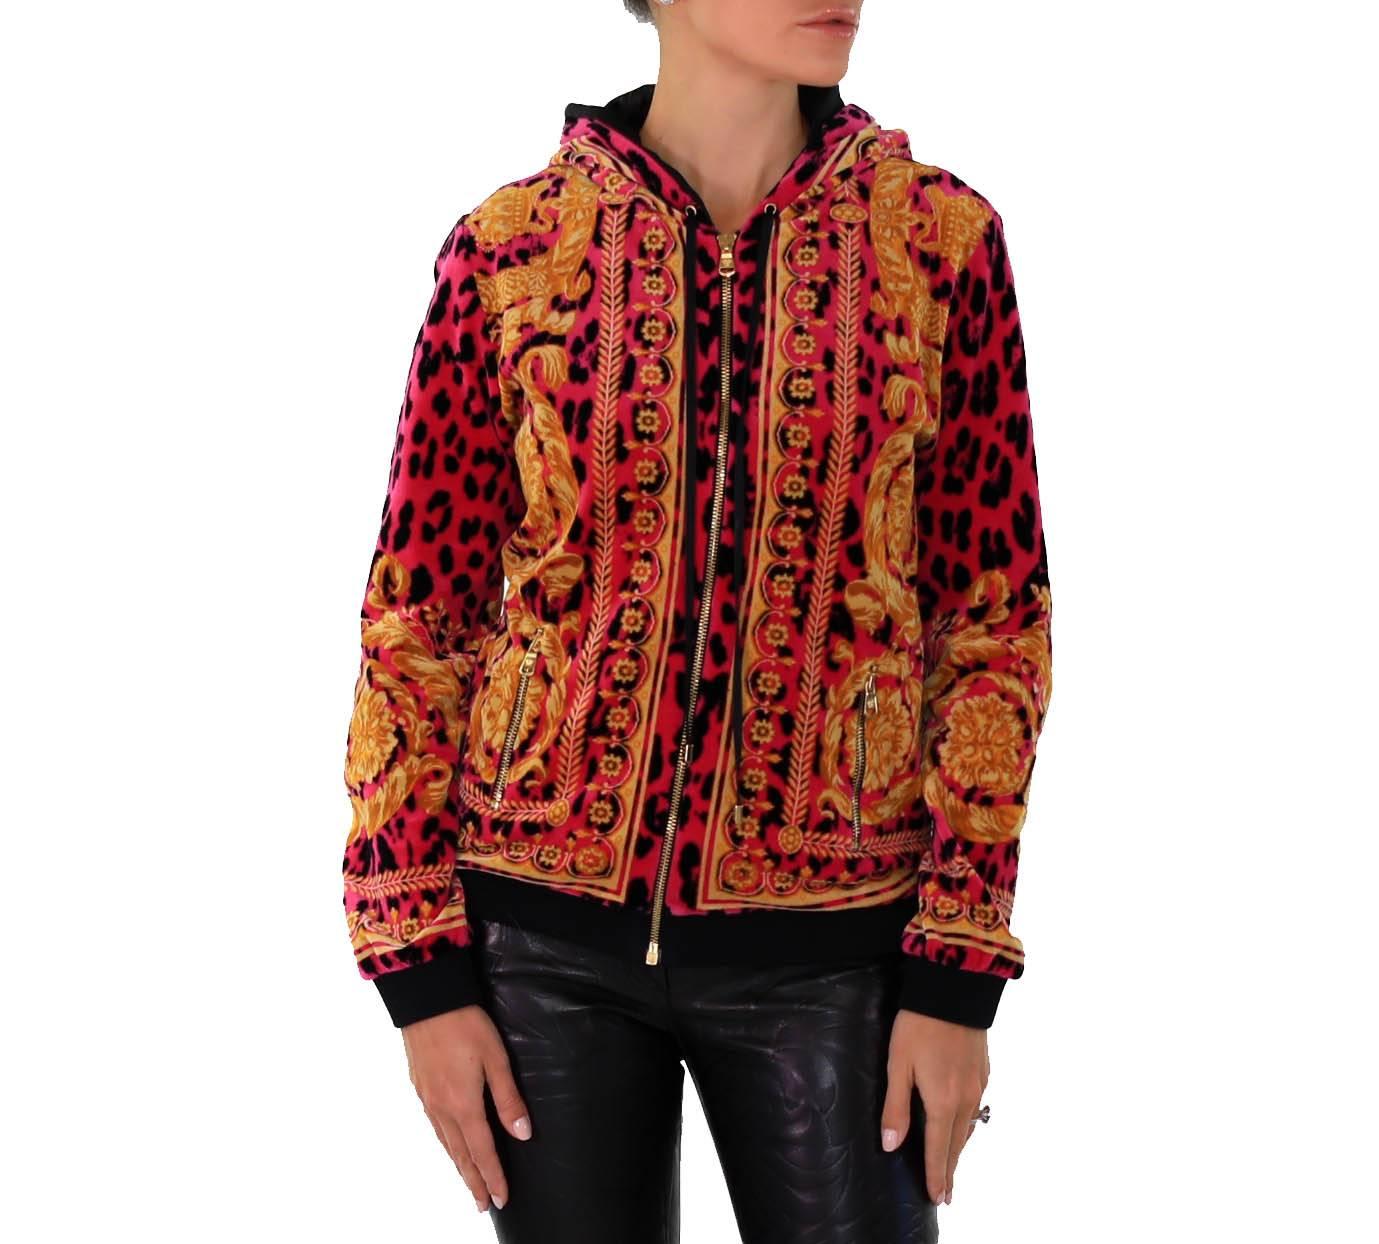  BRAND NEW 

Versace Barocco Animalier Velvet Jacket

Hood
Front zip closure
Long sleeves with banded cuffs
2 front zippered pockets
 Allover print with solid contrast trim
Unlined
Banded hem


Fiber Content:
93% cotton, 7% nylon
IT Size 40 - US